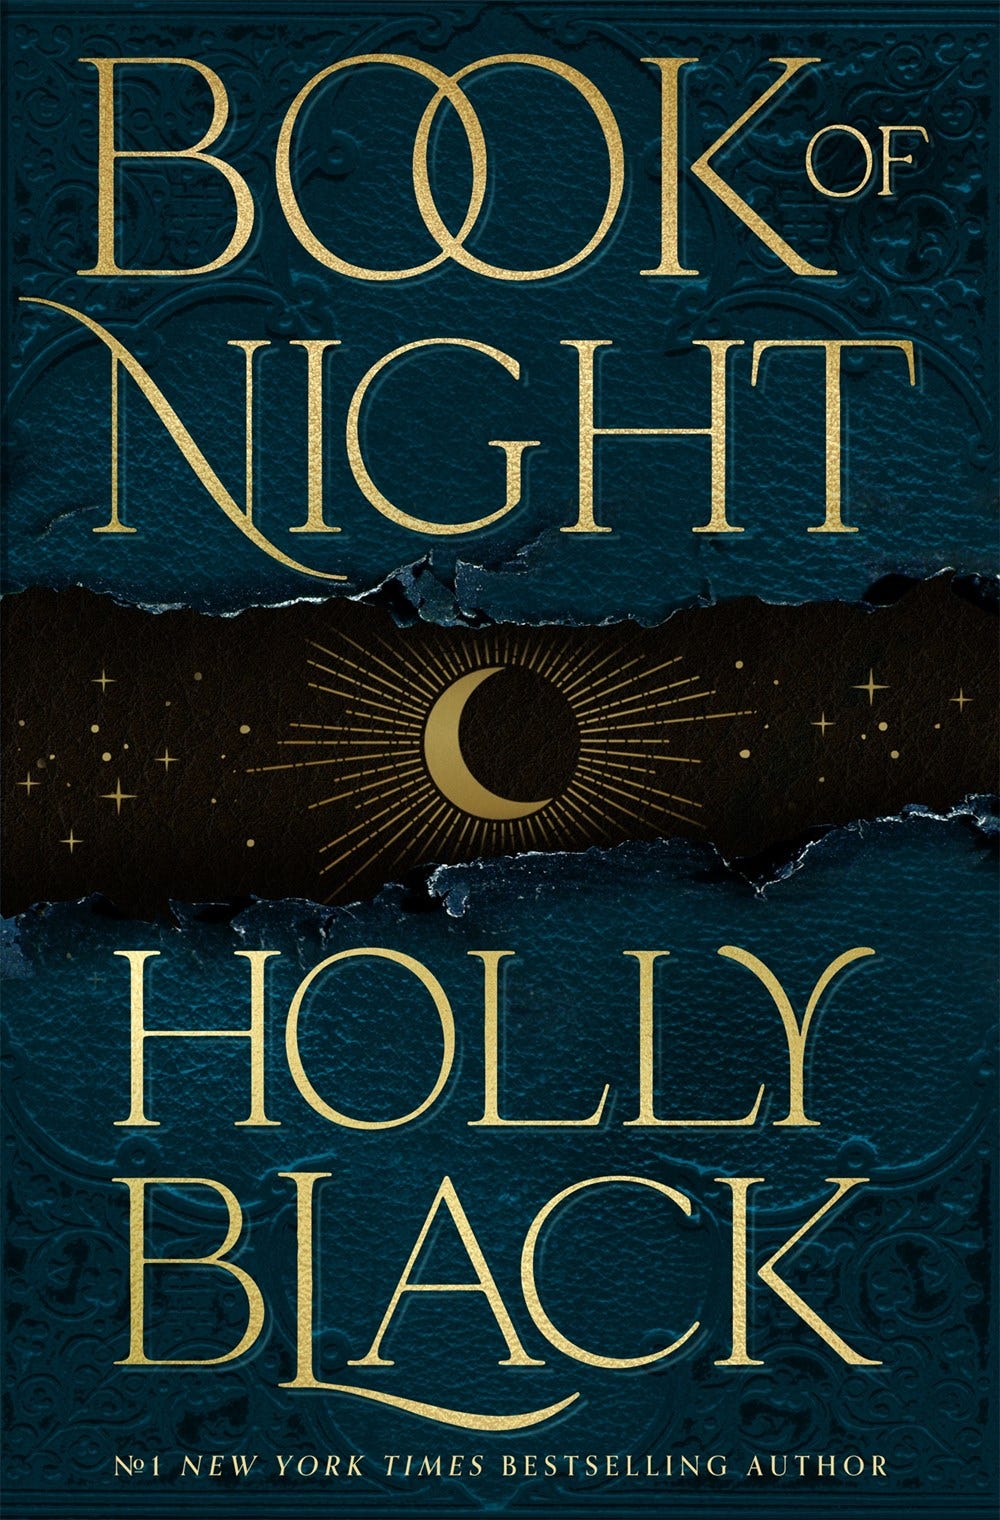 Book of Night (Book of Night, #1) by Holly Black | Goodreads